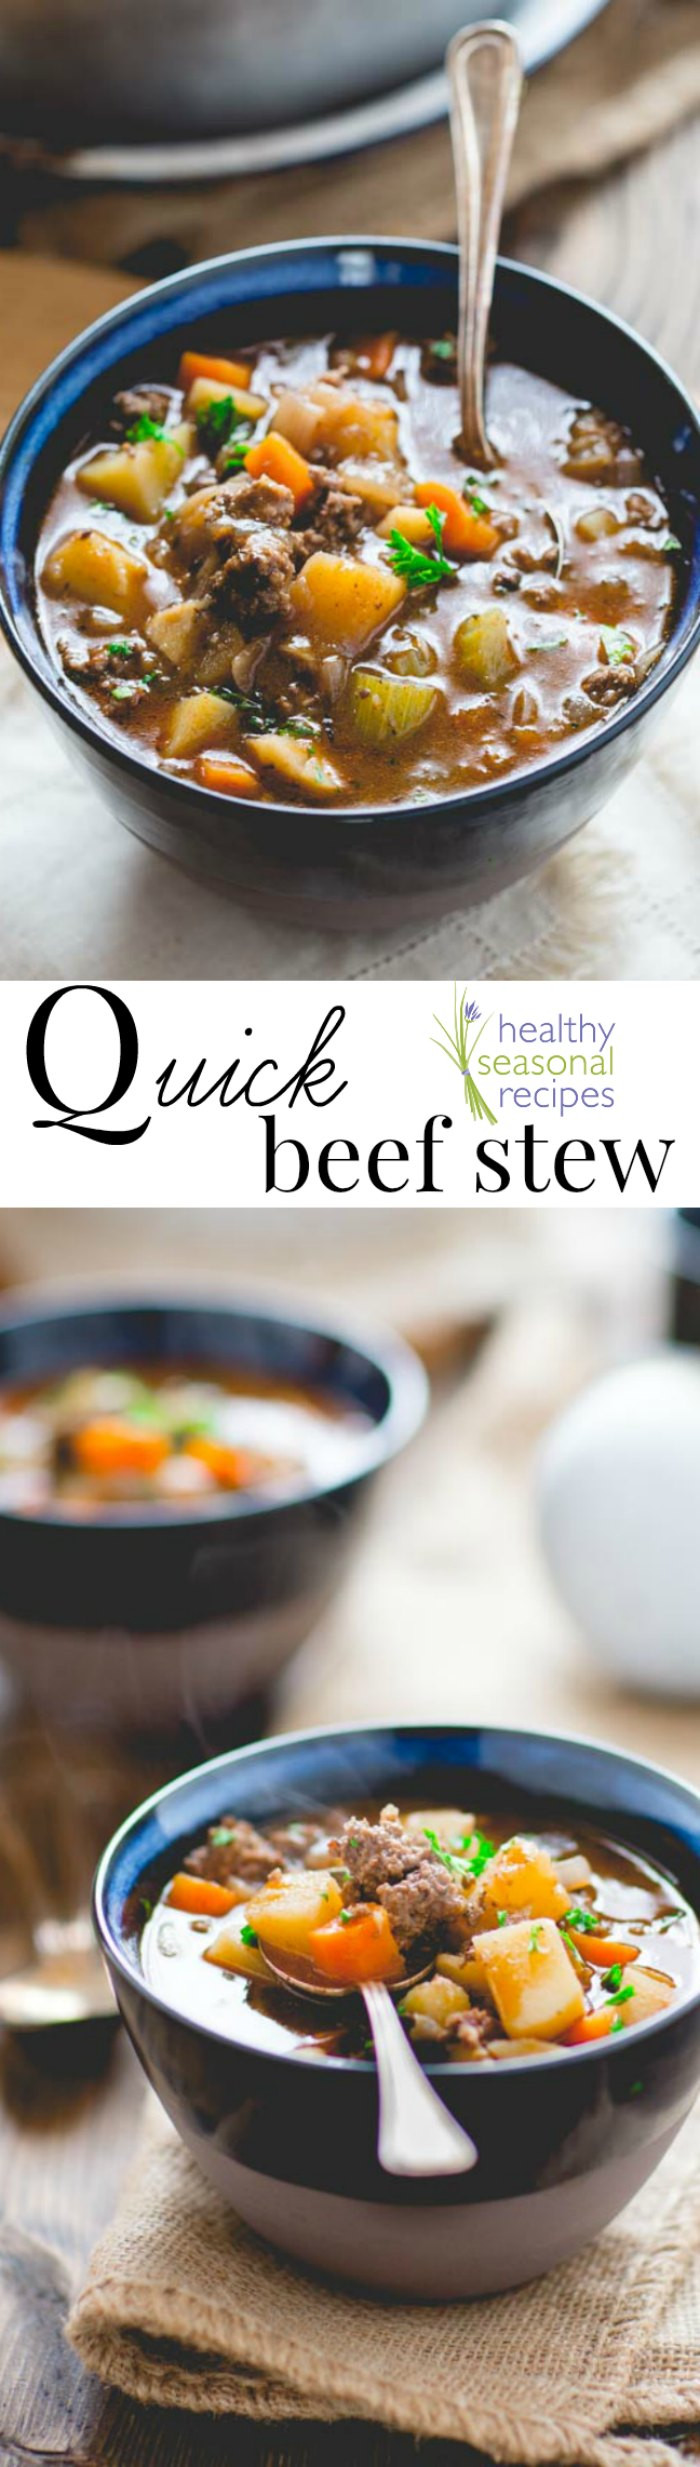 Heart Healthy Slow Cooker Recipes
 heart healthy beef stew slow cooker